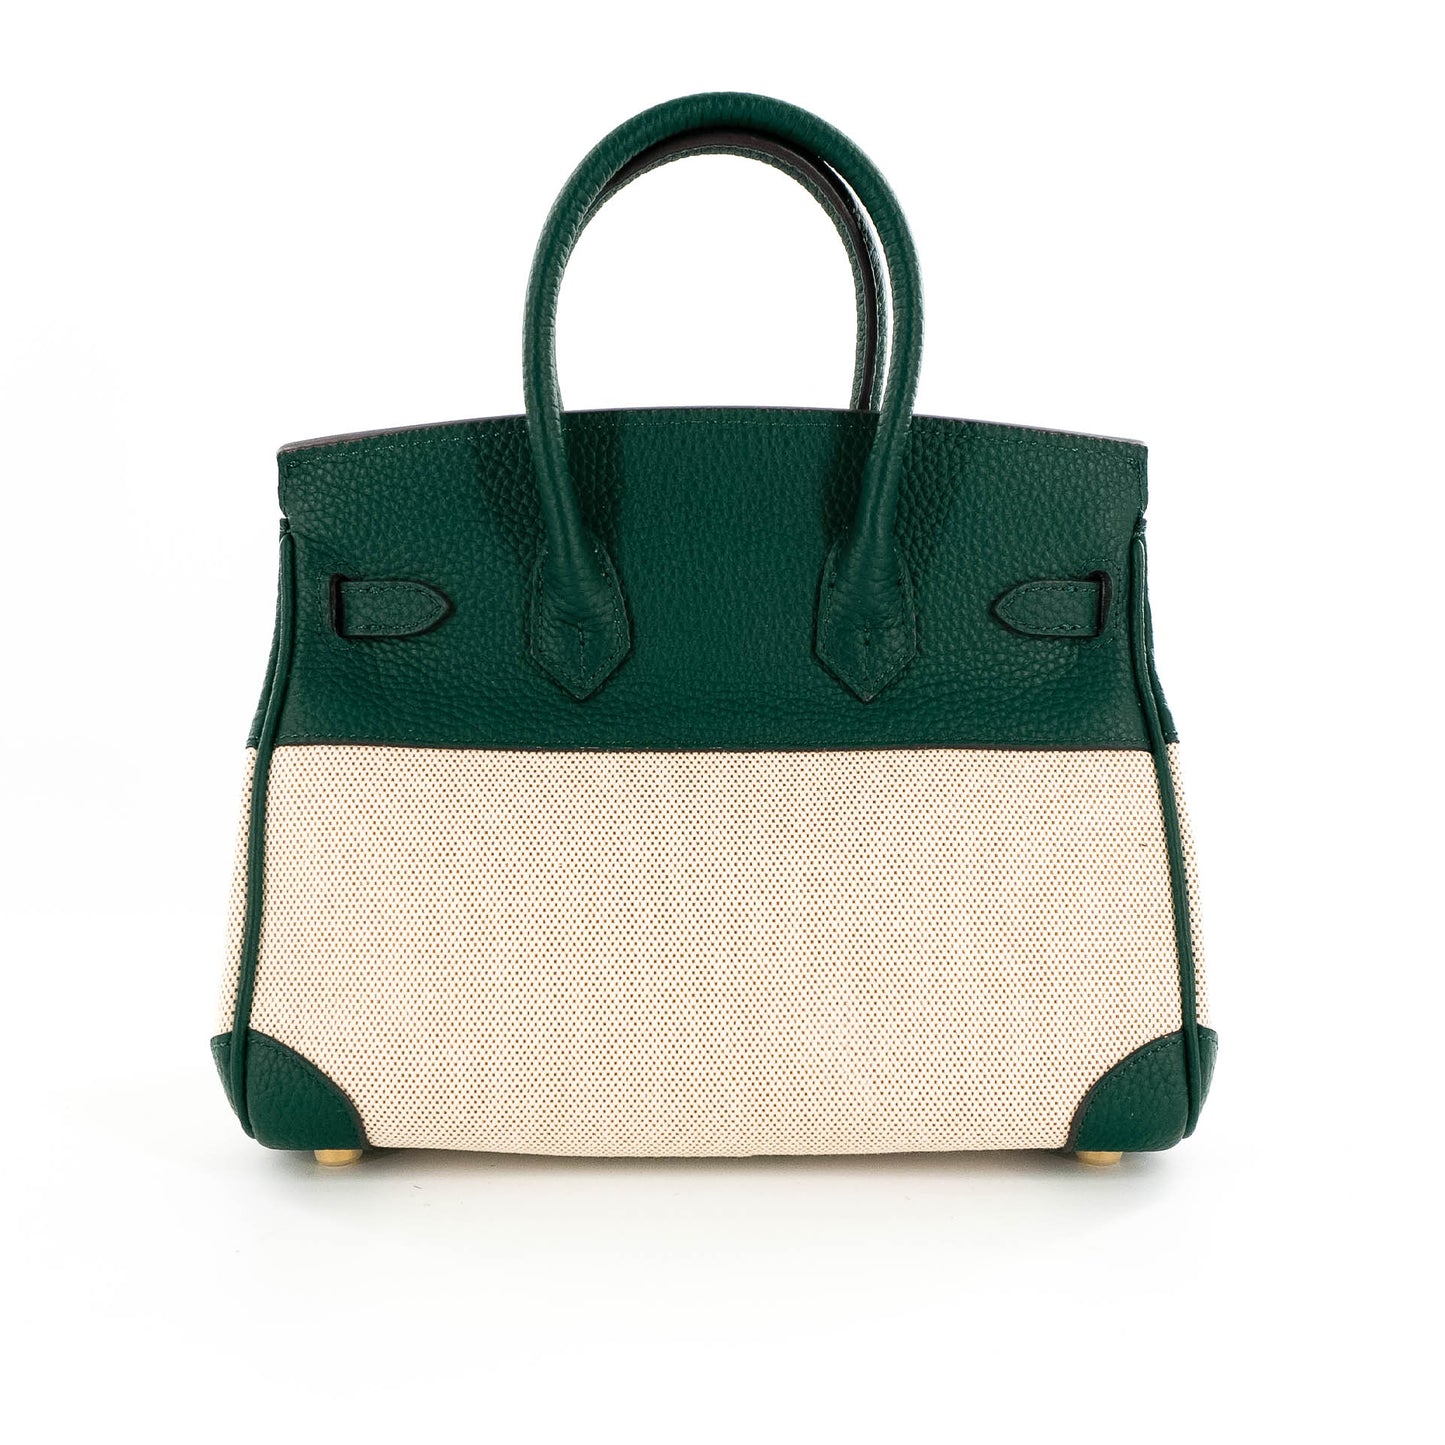 Duchess Handbag in Linen and Green Leather